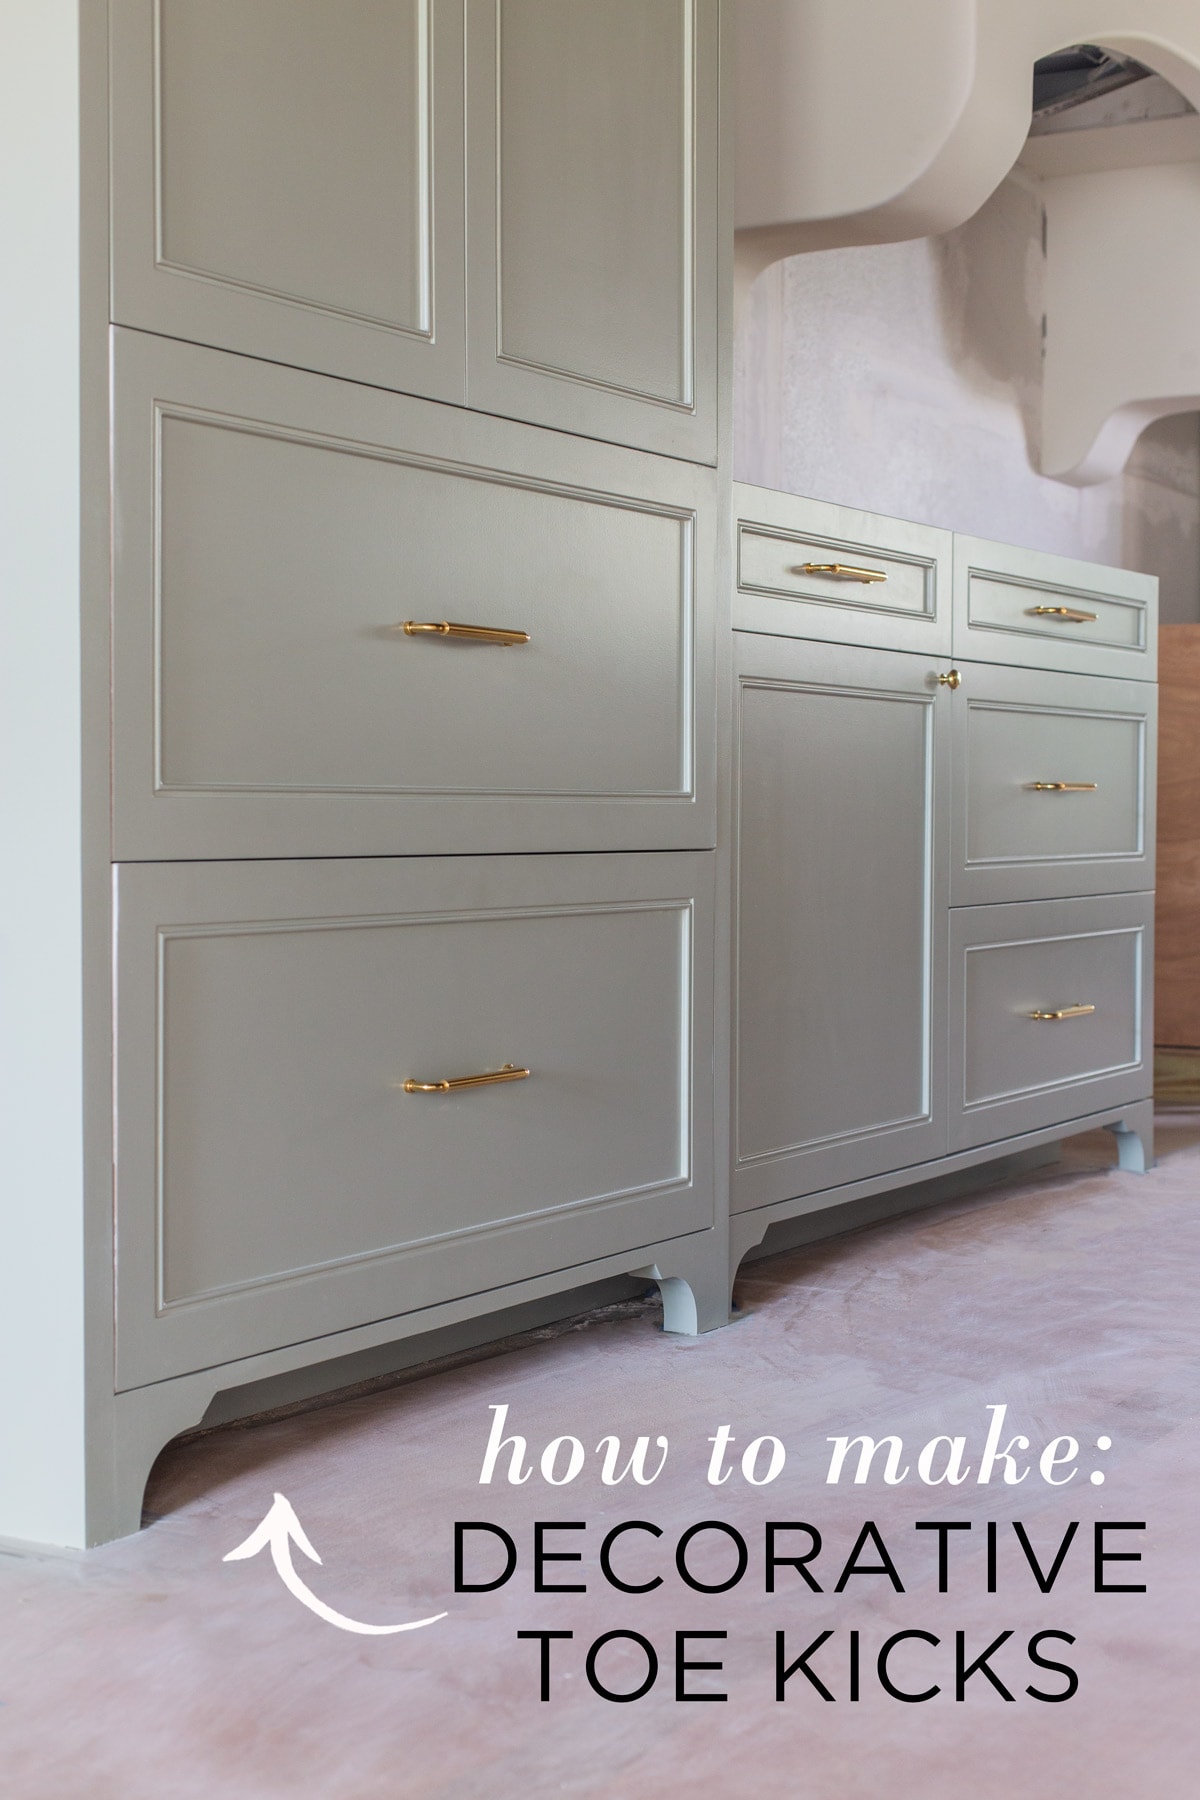 How to Add Decorative Toe Kicks to your Kitchen Cabinets - Jenna